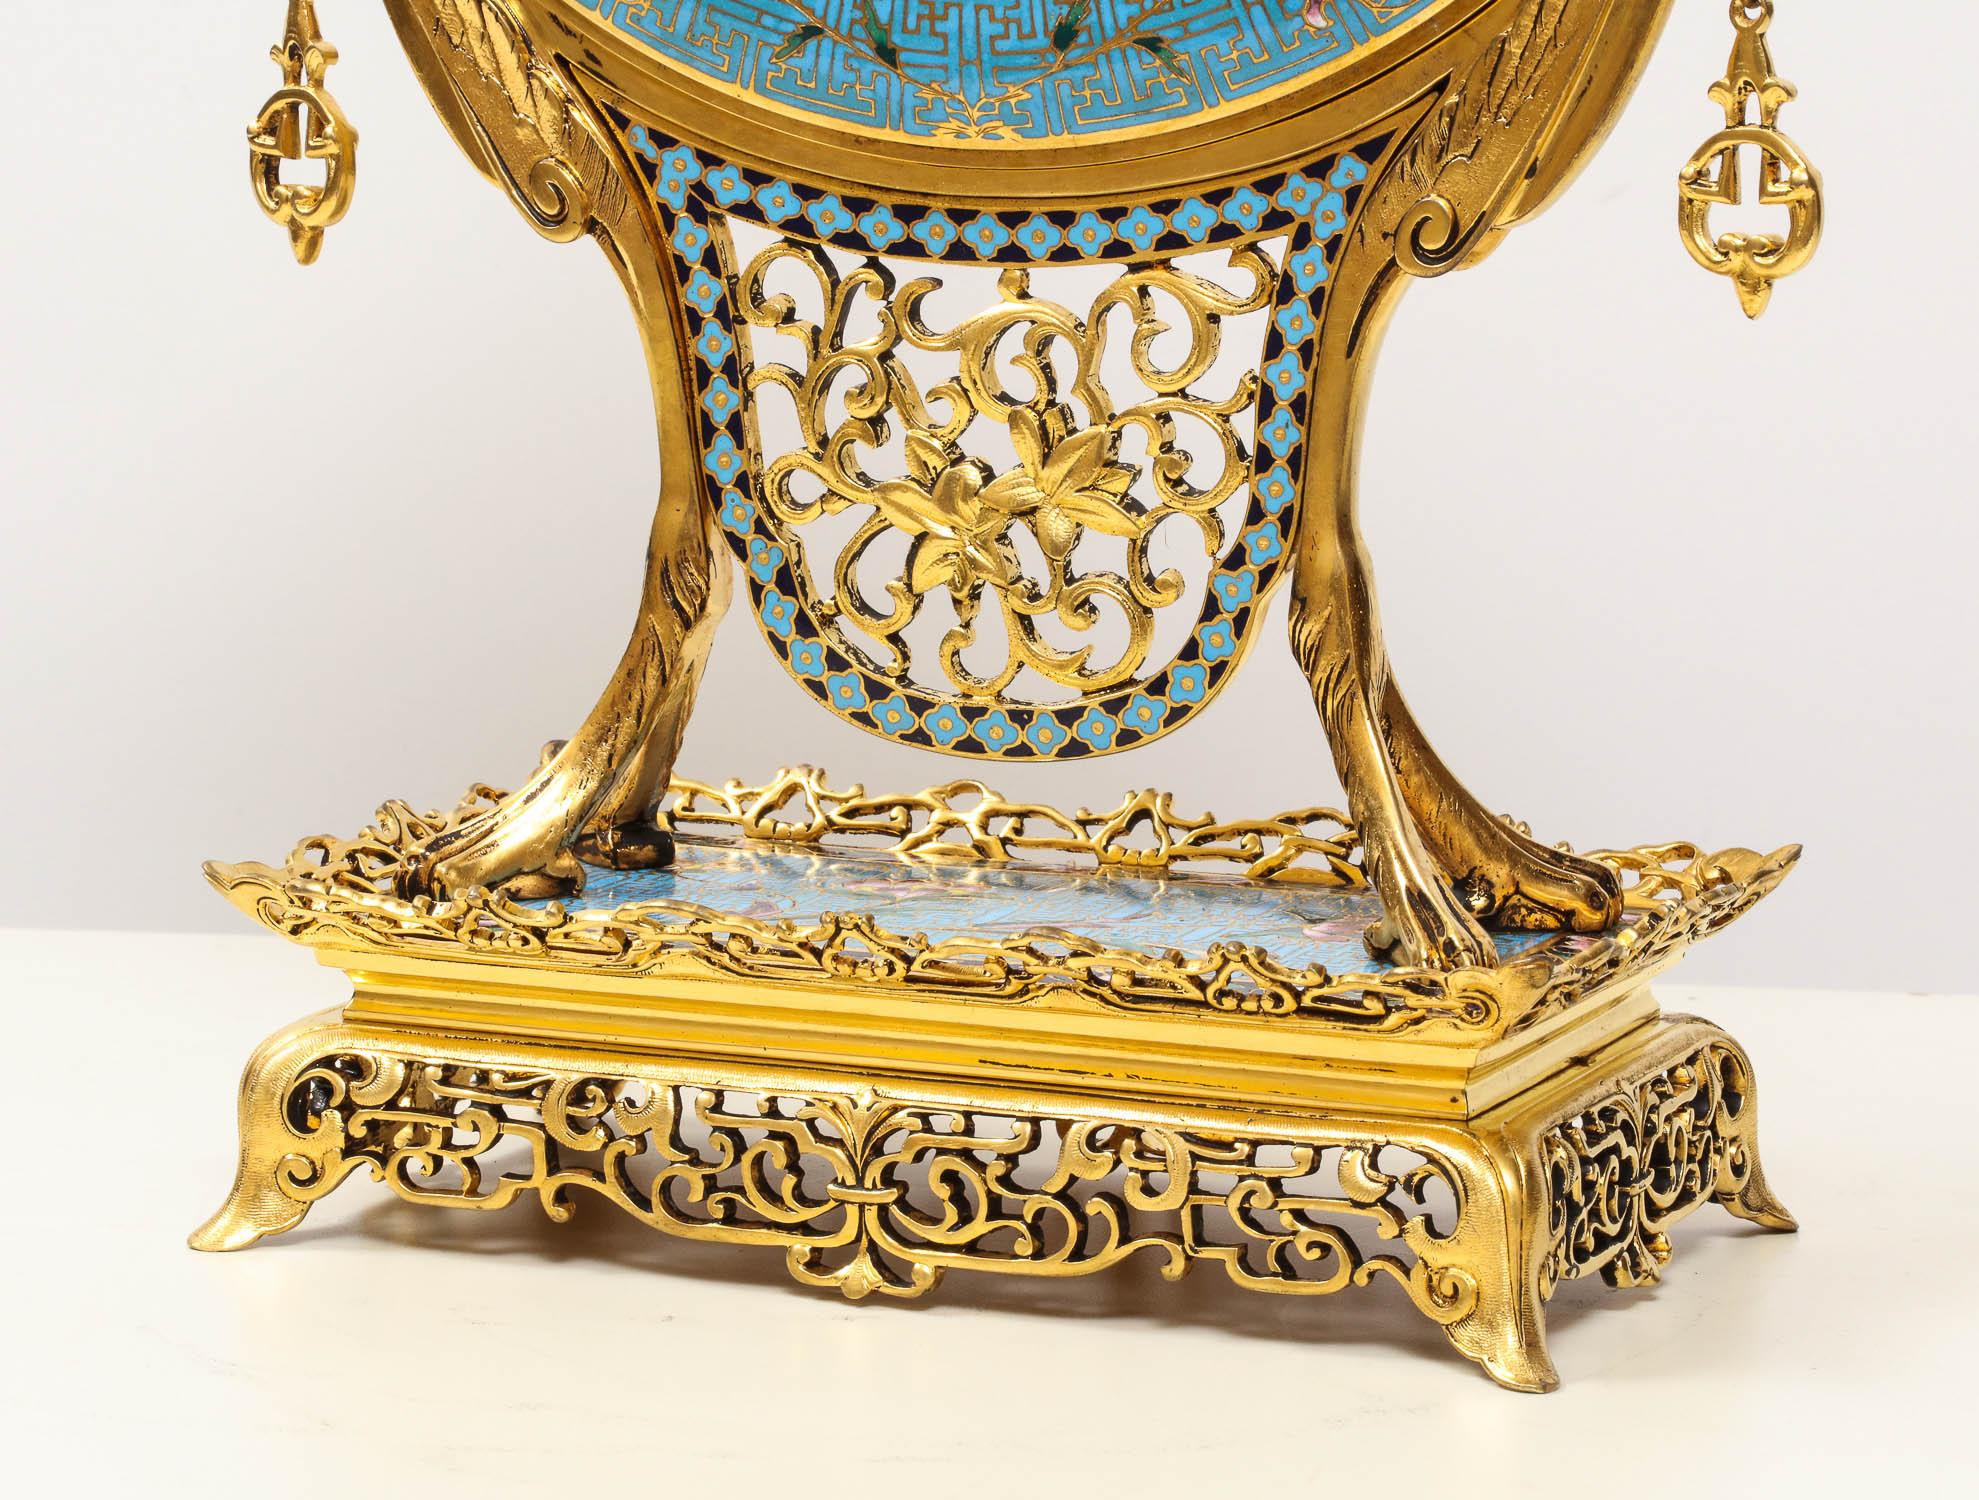 19th Century French Japonisme Ormolu and Champleve Cloisonne Enamel Mirror, Edouard Lievre